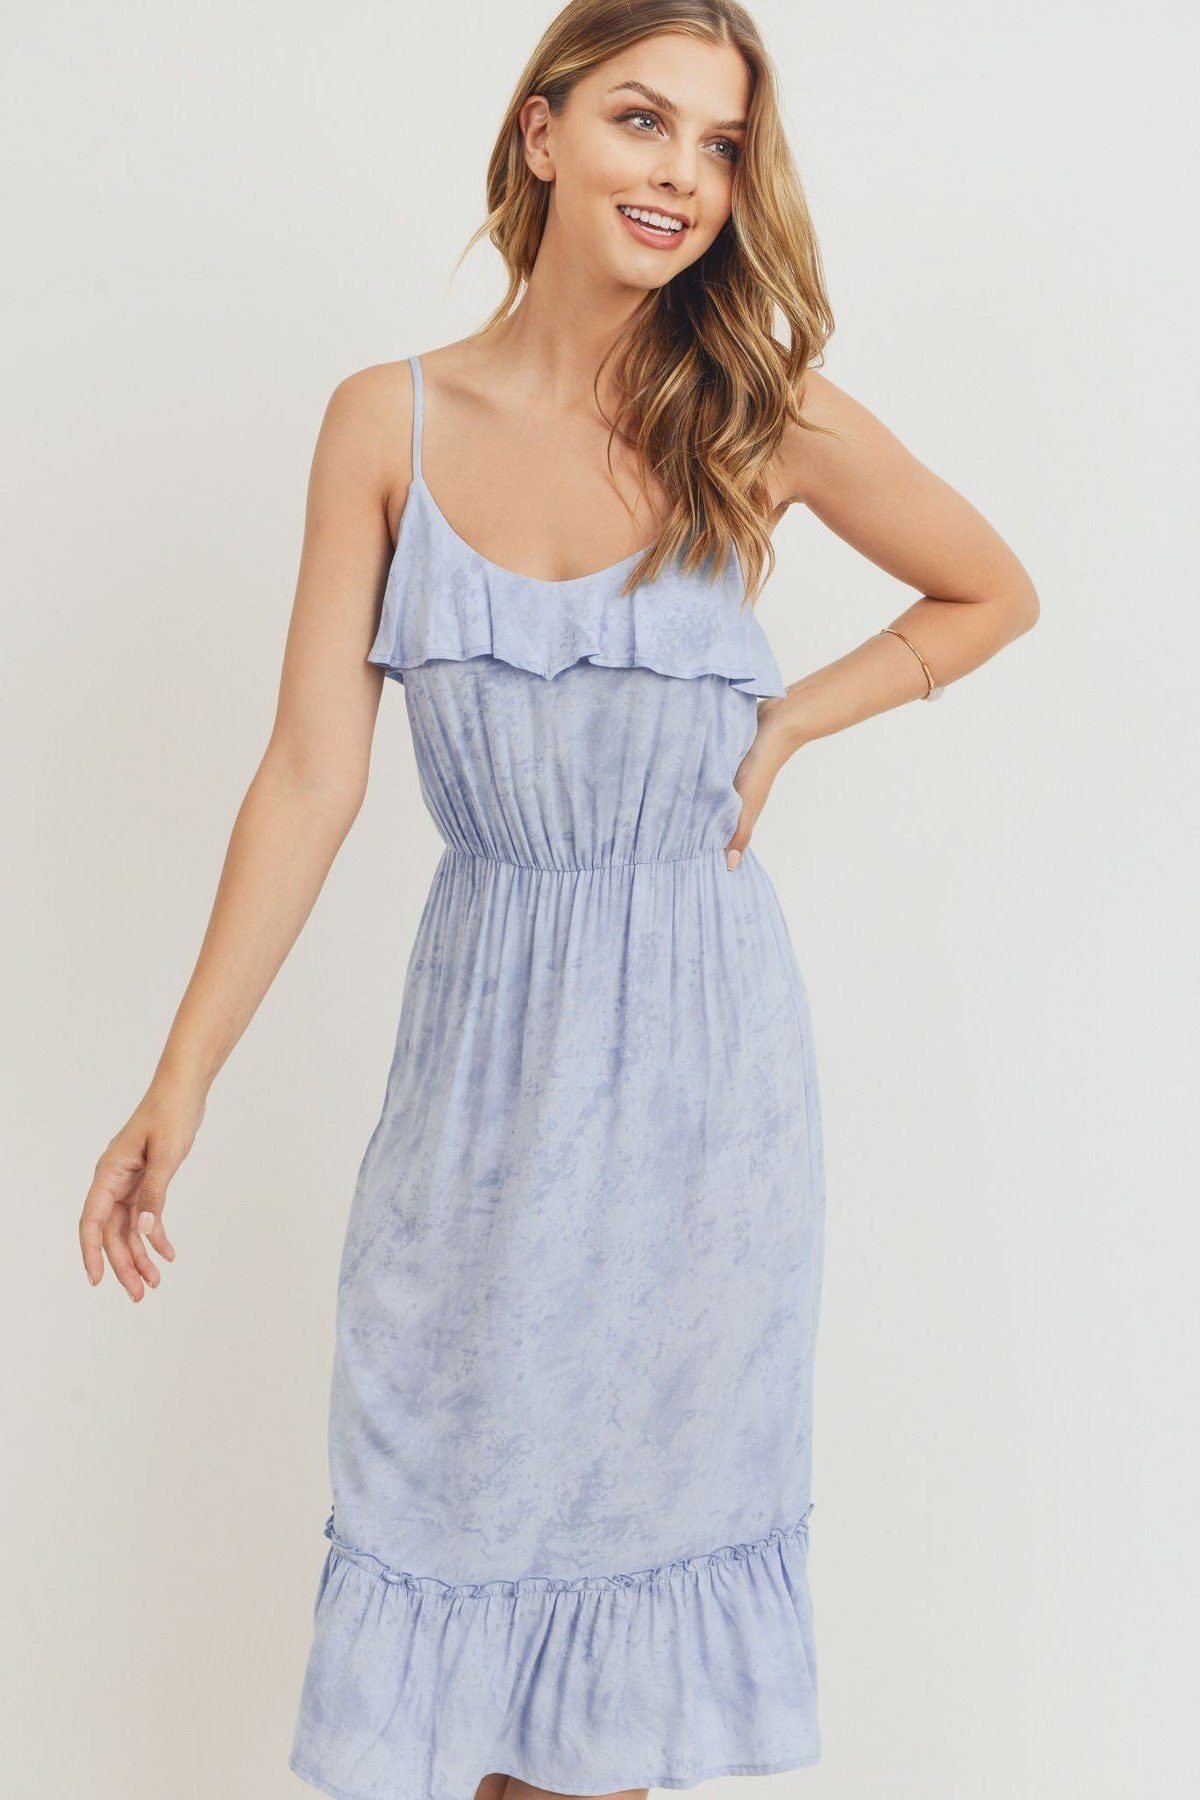 Caitlin In The Country 95% Polyester 5% Spandex Scoop Neck Ruffle Detail Spaghetti Strap Elastic Waist Midi Dress (Blue)